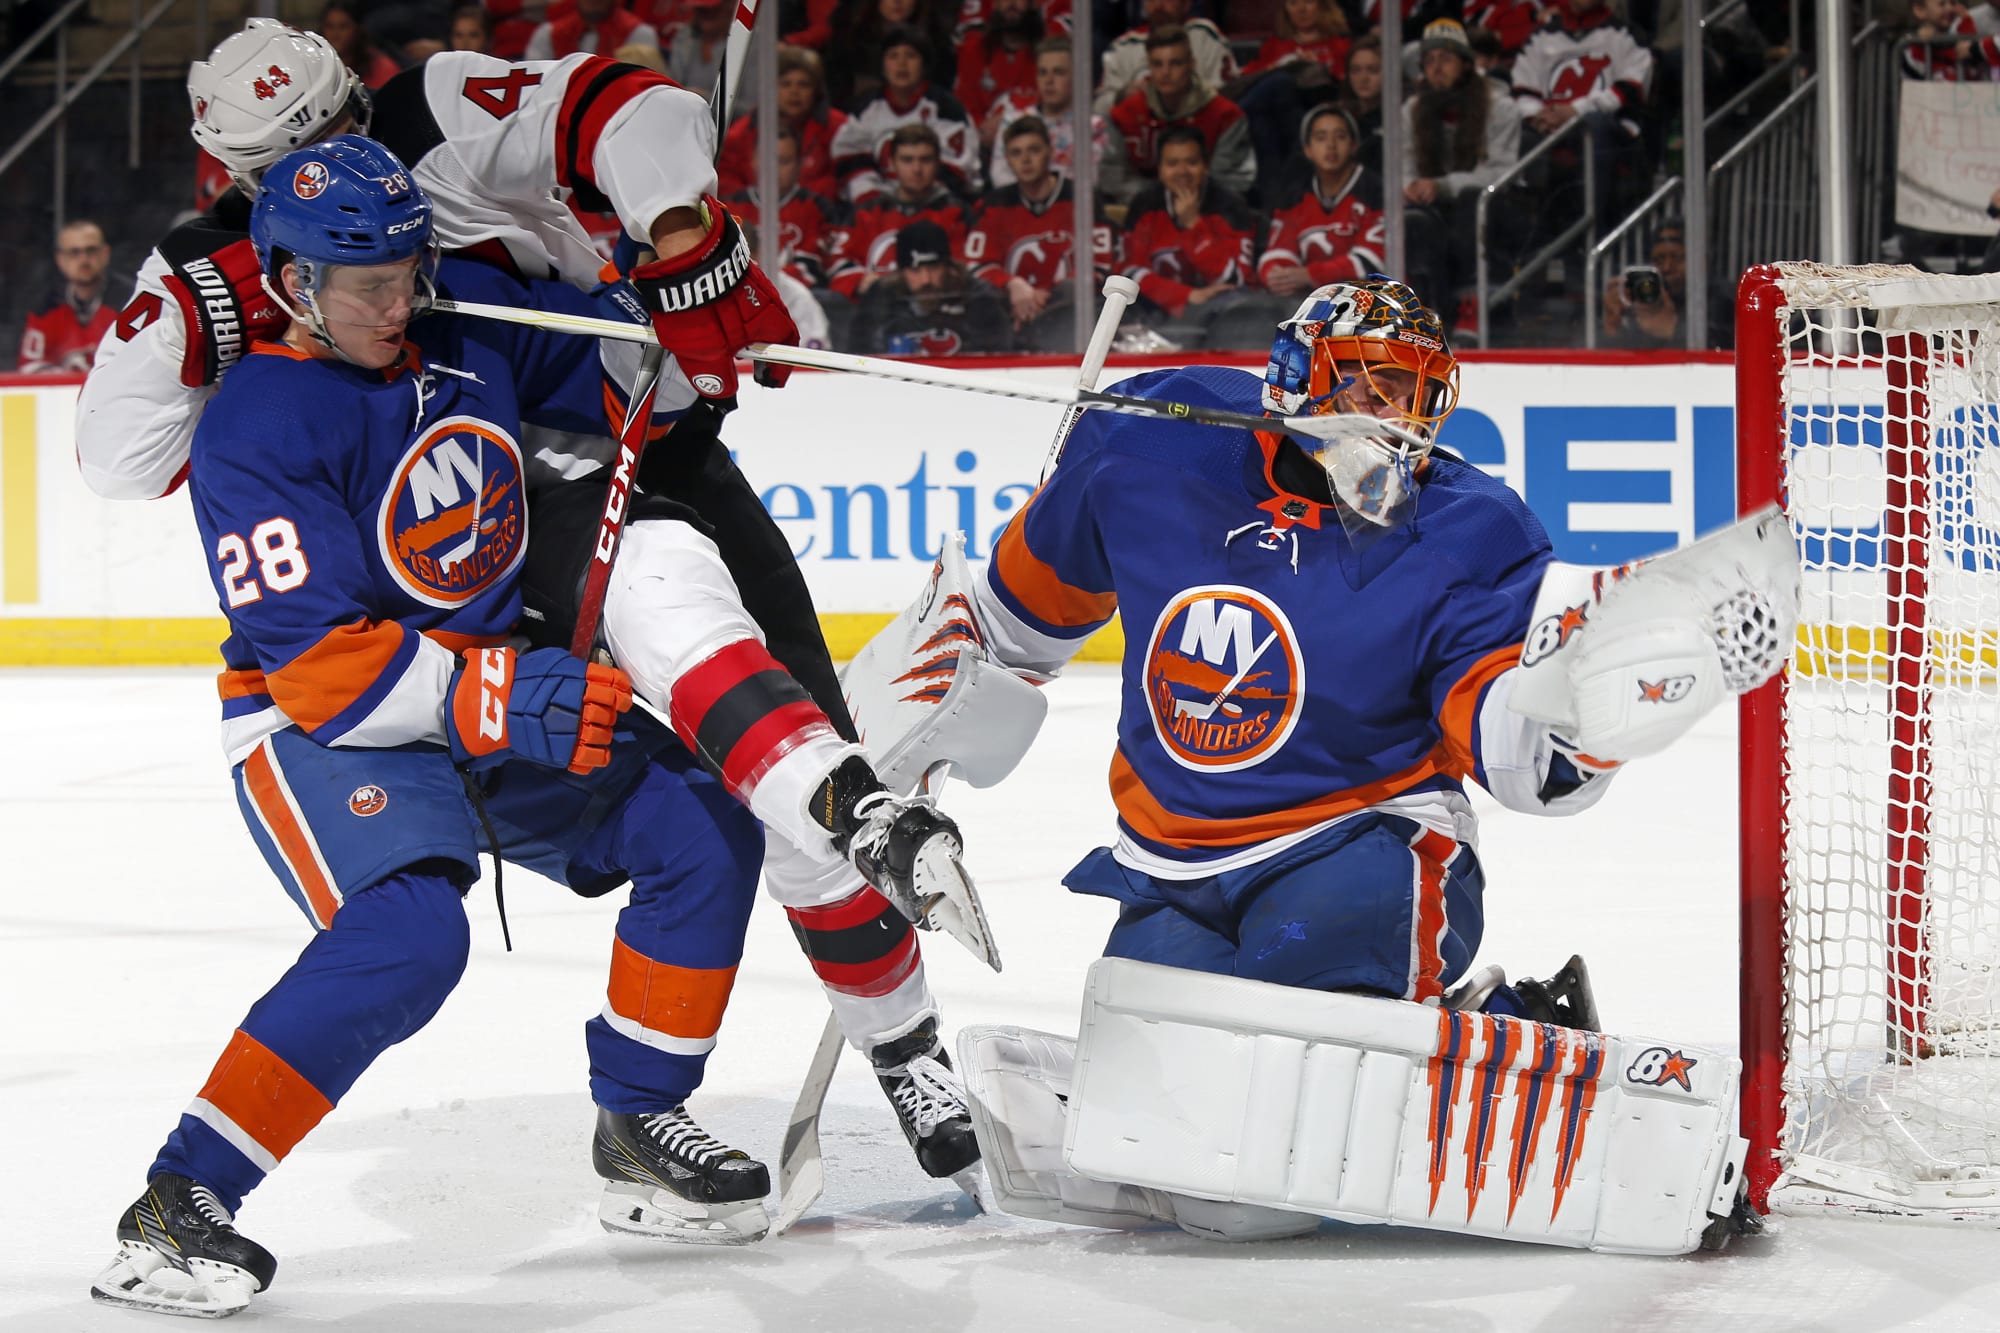 New York Islanders: What lies ahead for the Isles as the season hits March